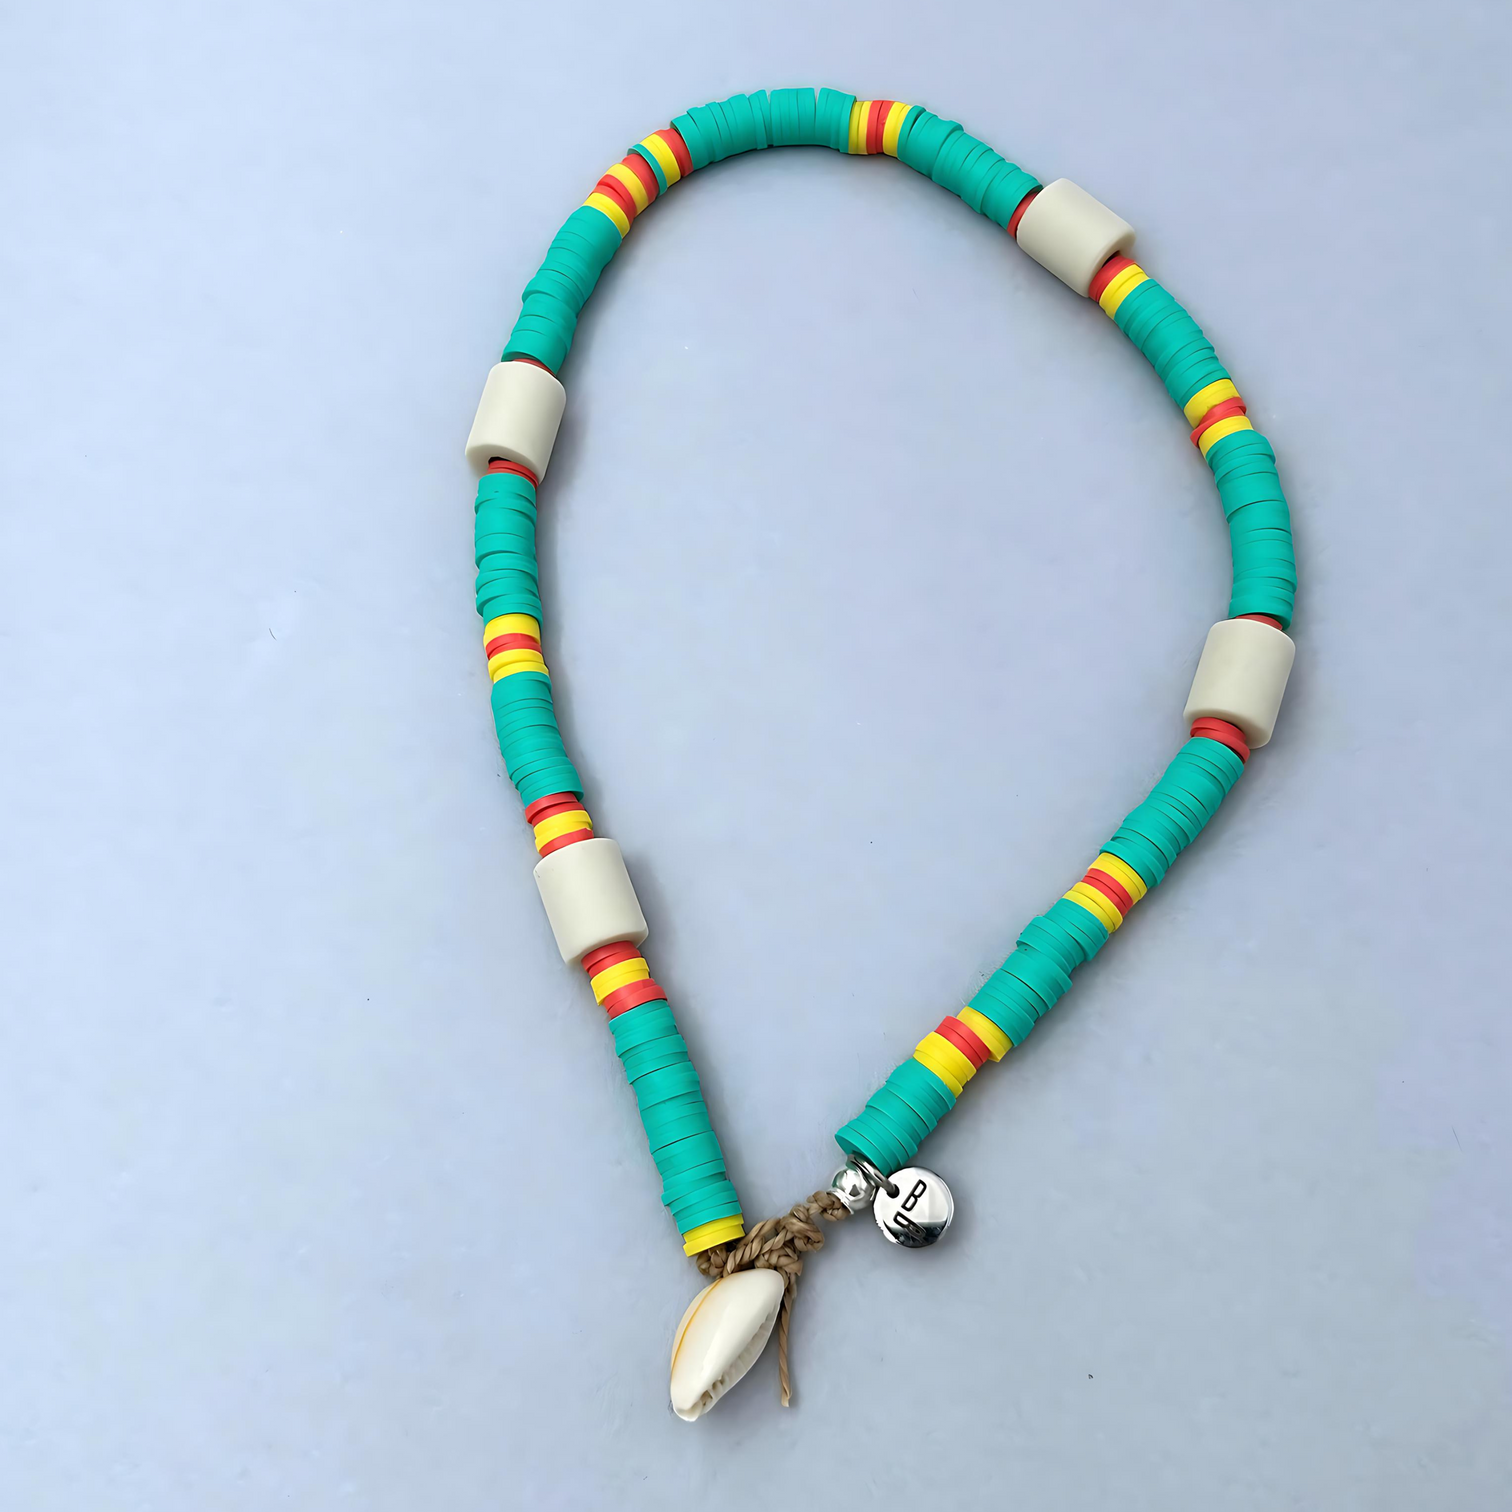 The cool surfer's look anti-tick dog necklace in Caribbean Green 